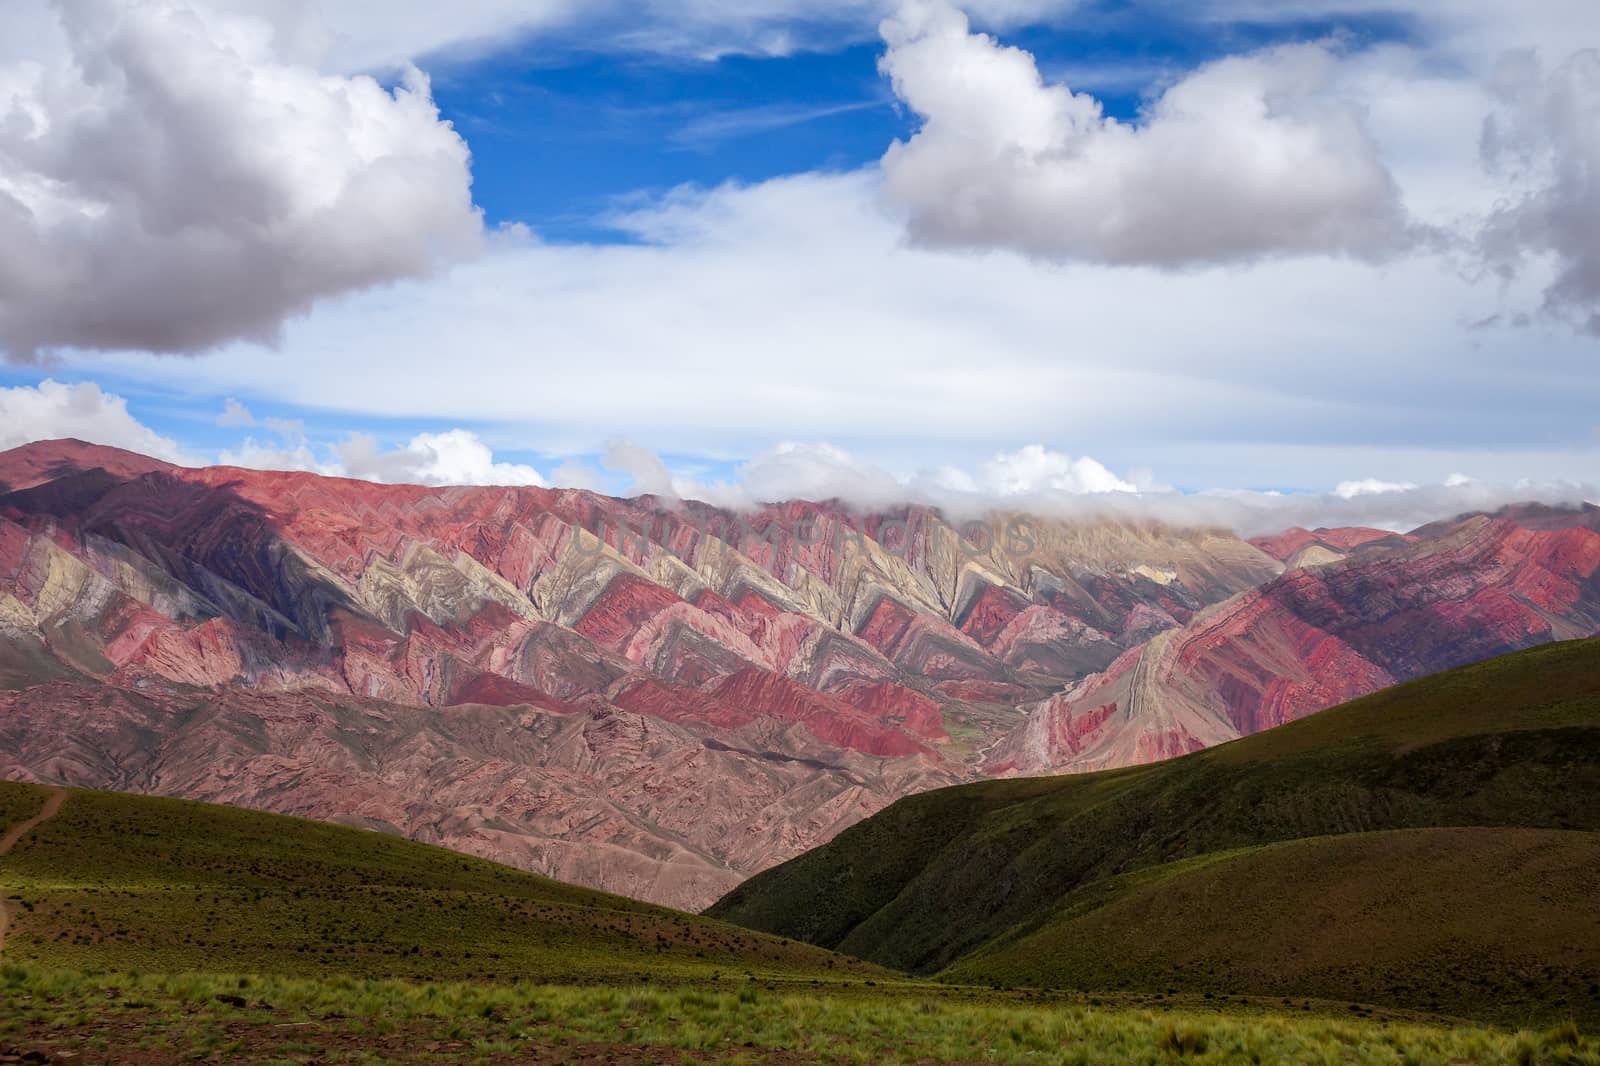 Serranias del Hornocal, colored mountains, Argentina by daboost